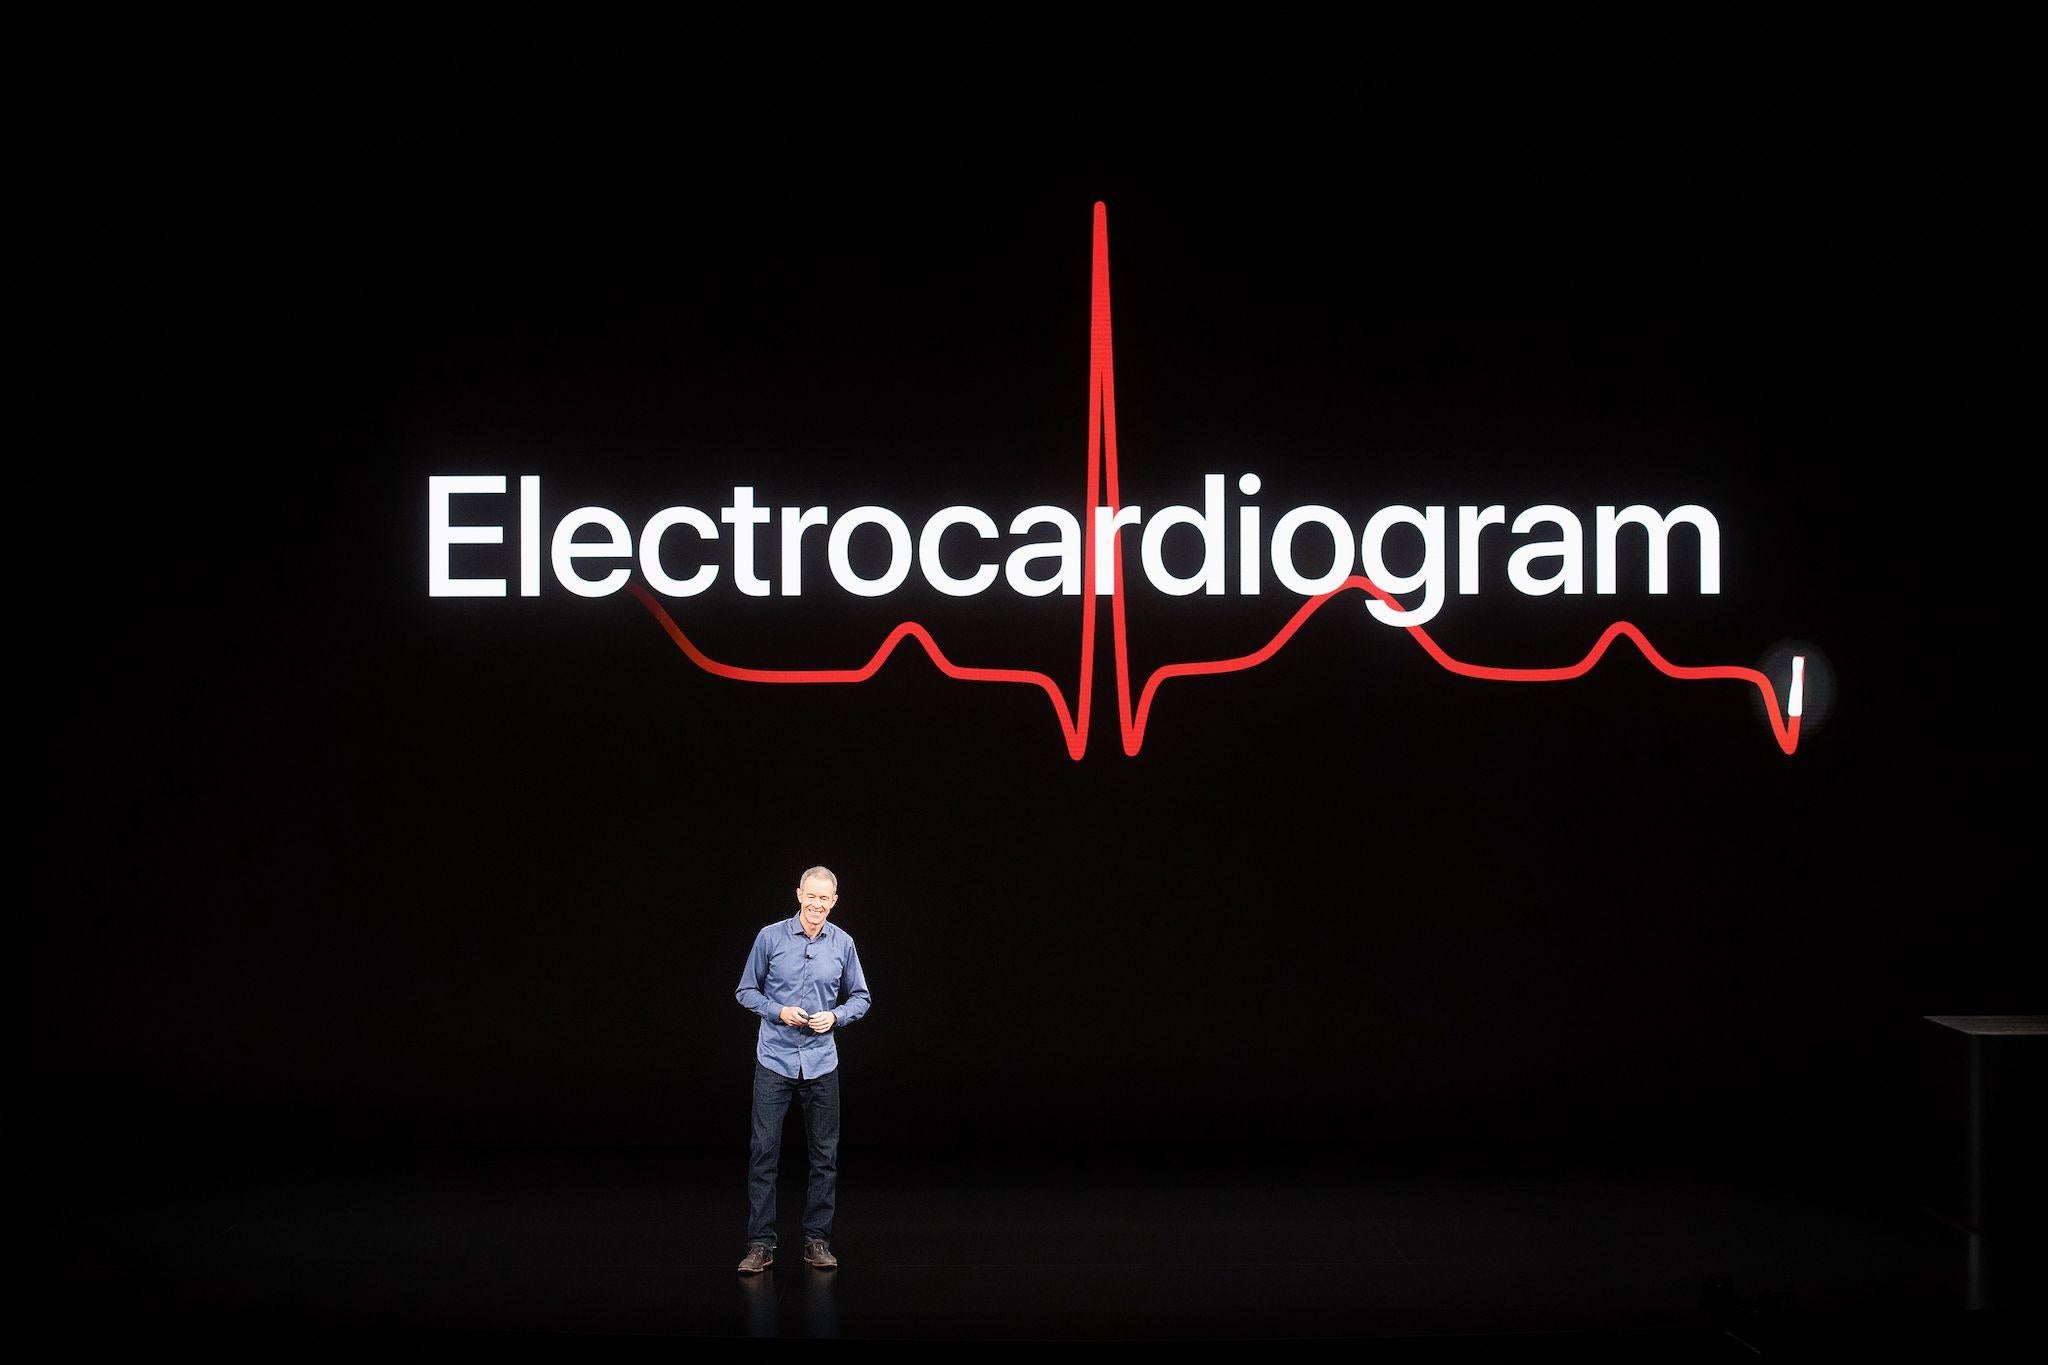 Apple COO Jeff Williams discusses Apple Watch Series 4 during an event on September 12, 2018, in Cupertino, California, the watch lets users take ECG readings